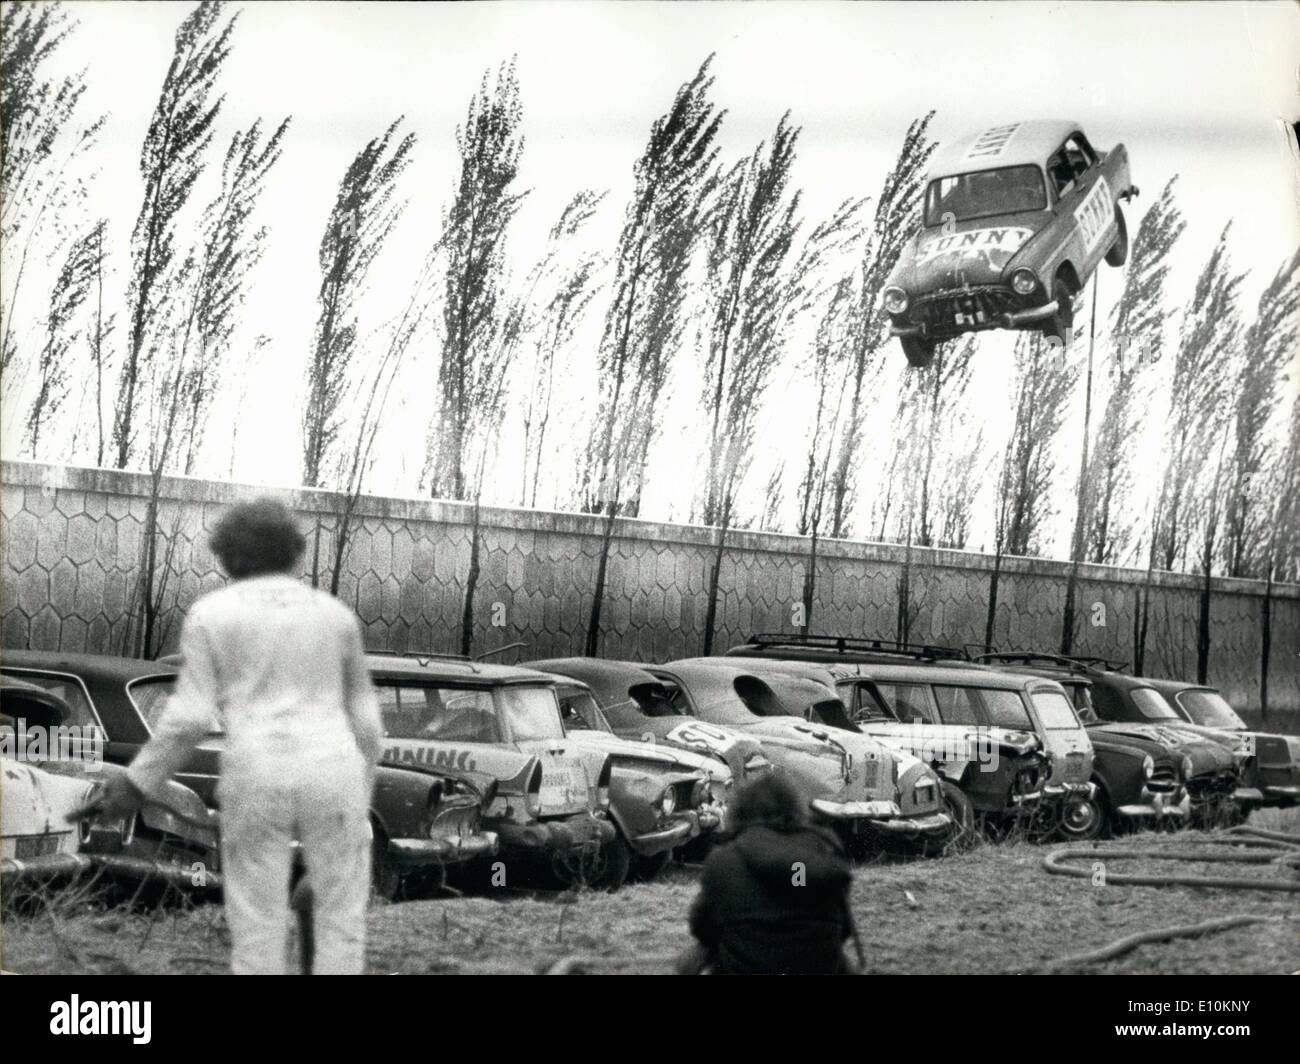 May 07, 1973 - Jean Sunny Attempts to Jump his Car Over Twenty Other Cars  Stock Photo - Alamy